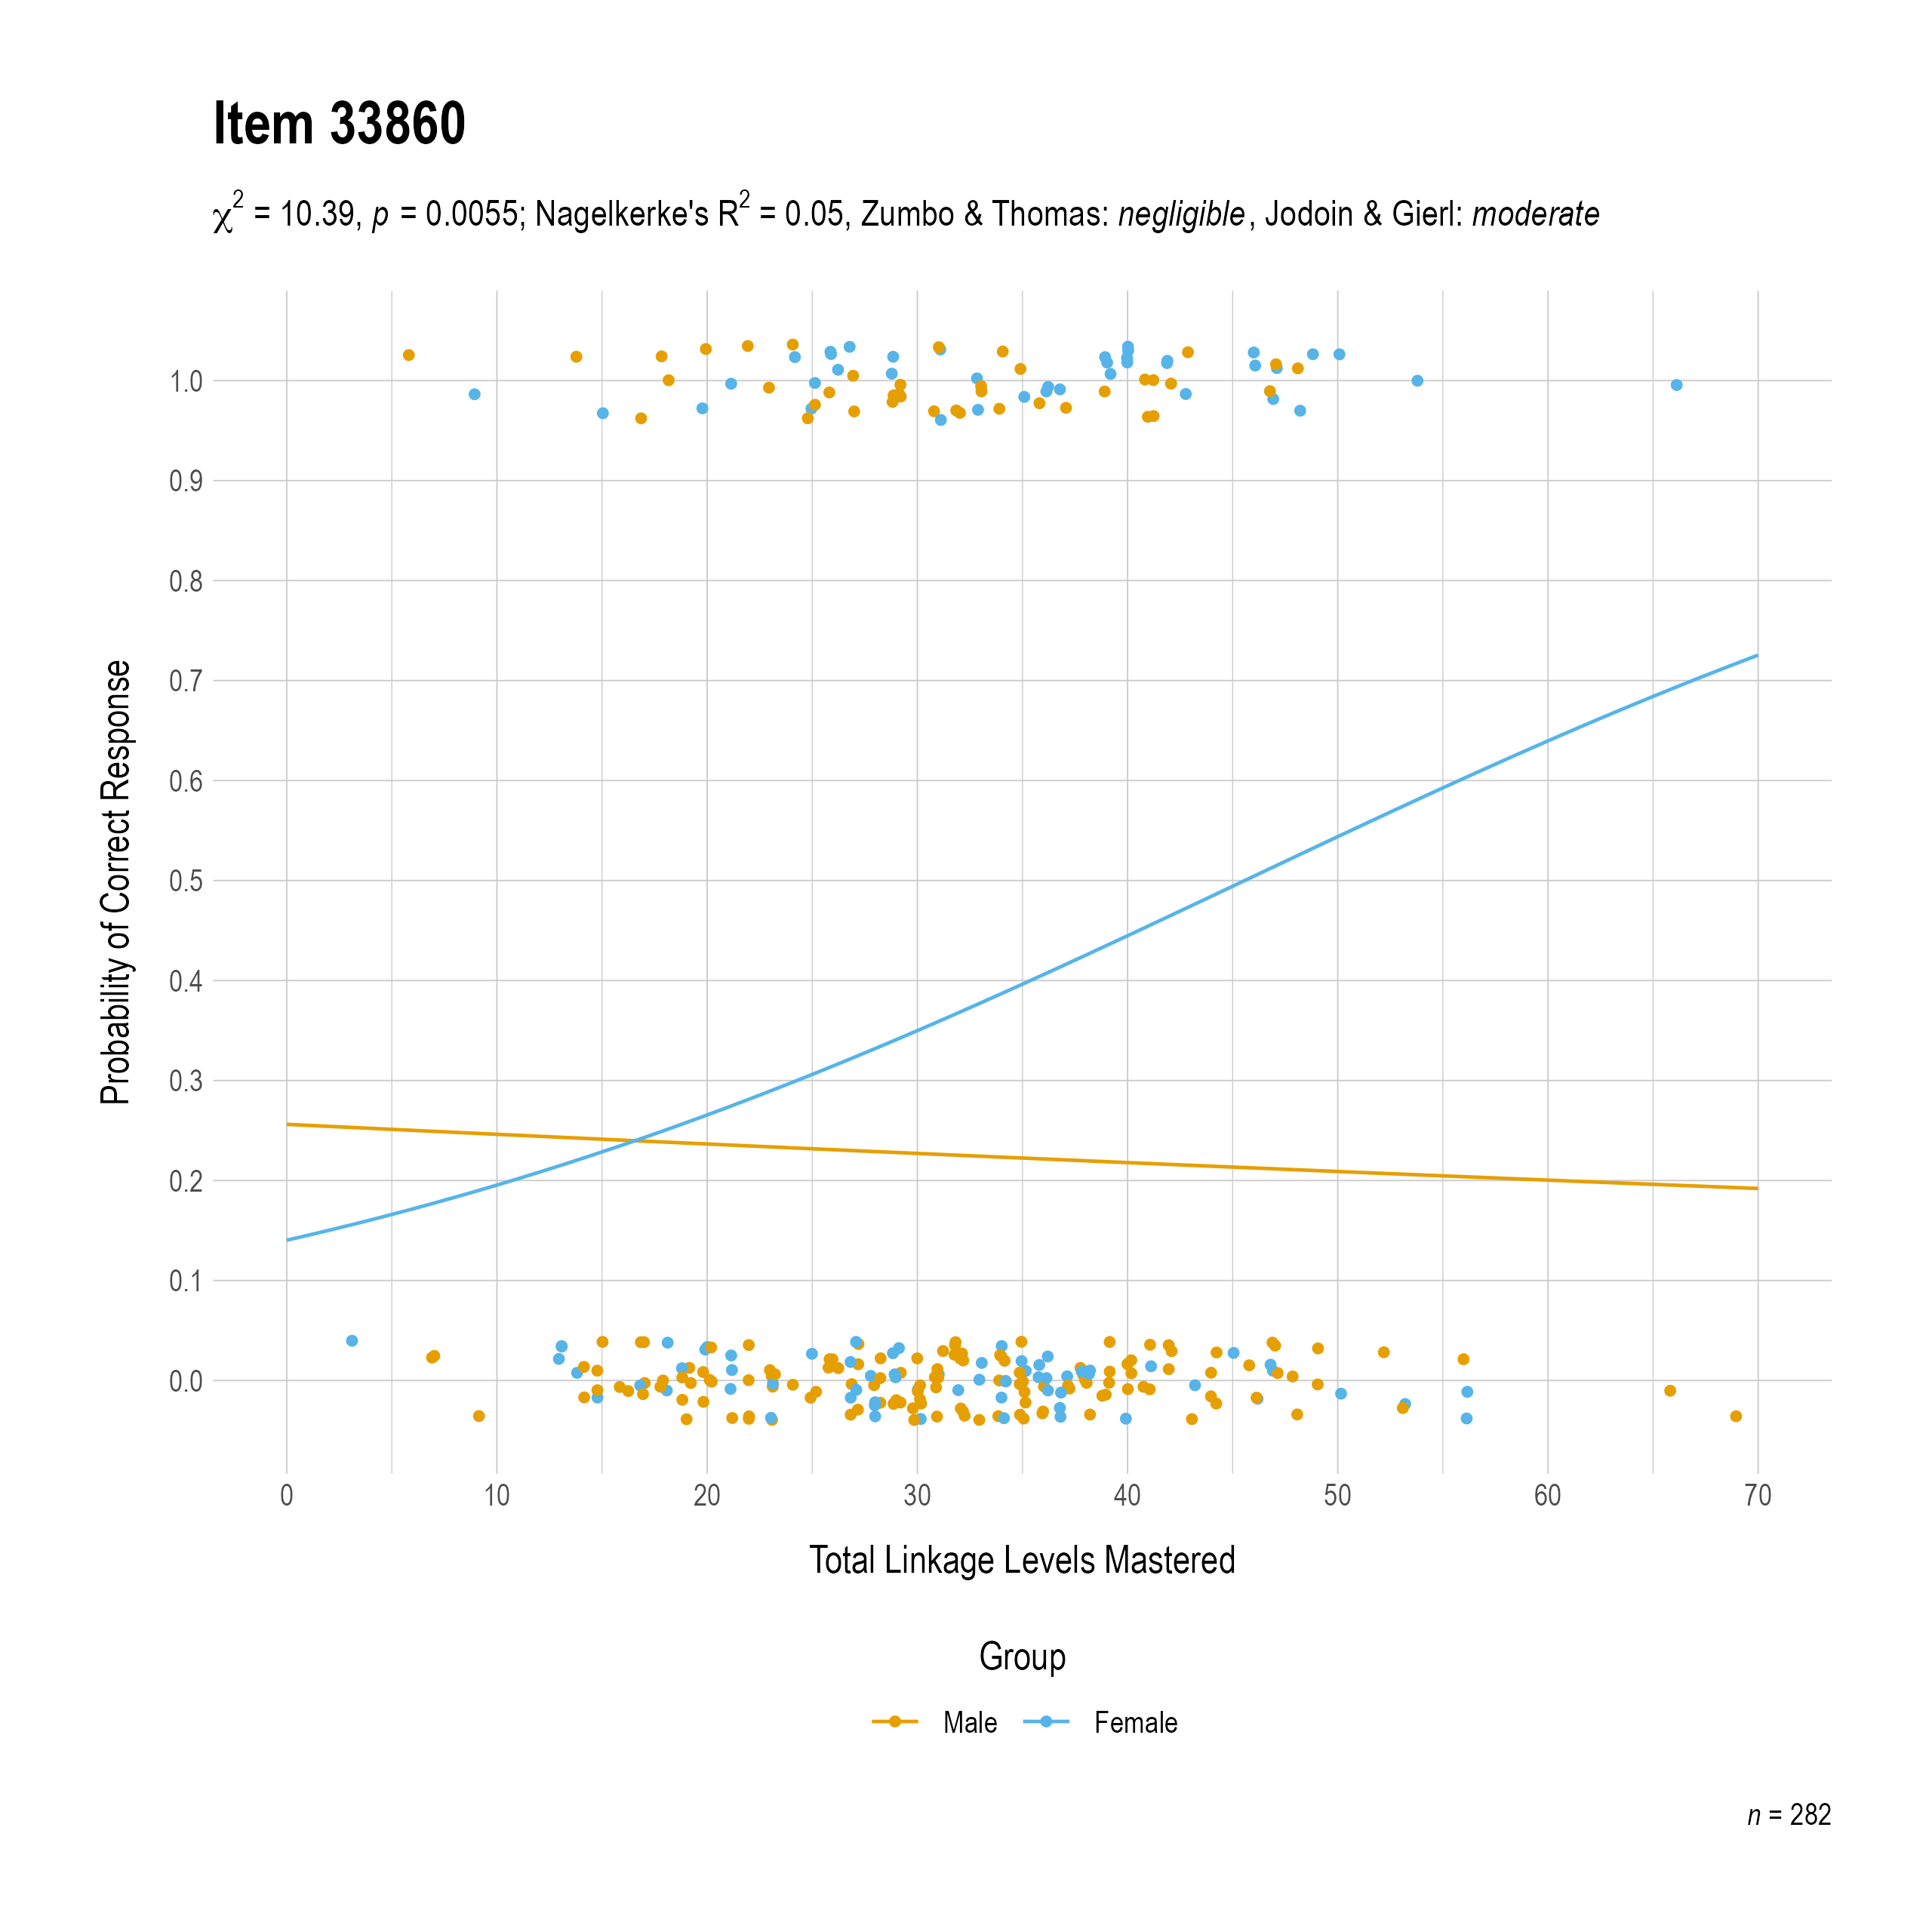 The plot of the combined gender differential item function evidence for English language arts item 33860. The figure contains points shaded by group. The figure also contains a logistic regression curve for each group. The total linkage levels mastered in is on the x-axis, and the probability of a correct response is on the y-axis.